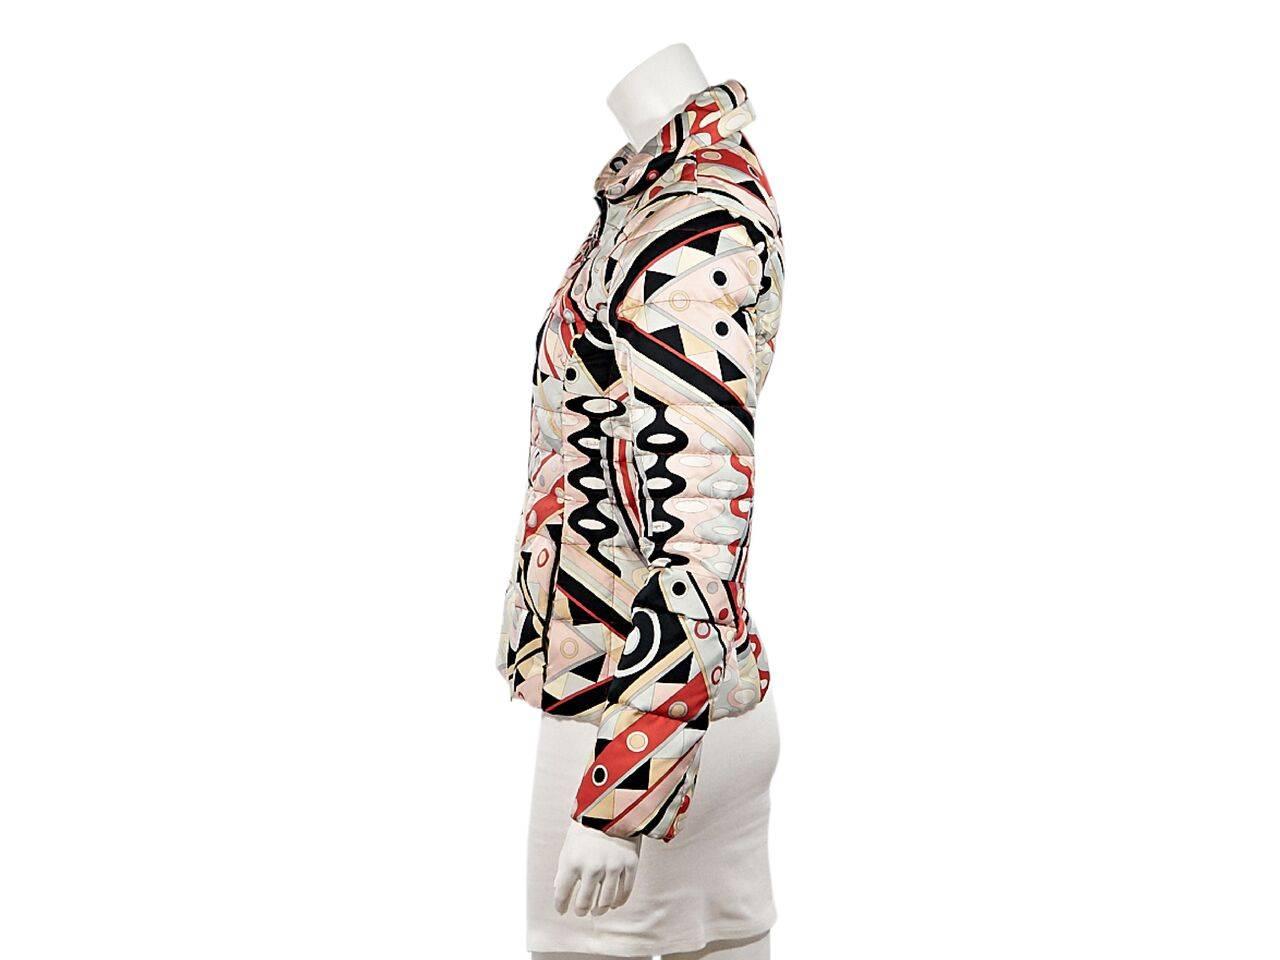 Product details:  Multicolor printed puffer jacket by Emilio Pucci.  Spread collar.  Long sleeves.  Zip-front closure.  On-seam zip waist pockets.  Princess seams create a flattering silhouette. 
Condition: Pre-owned. Very good.
Est. Retail $ 975.00